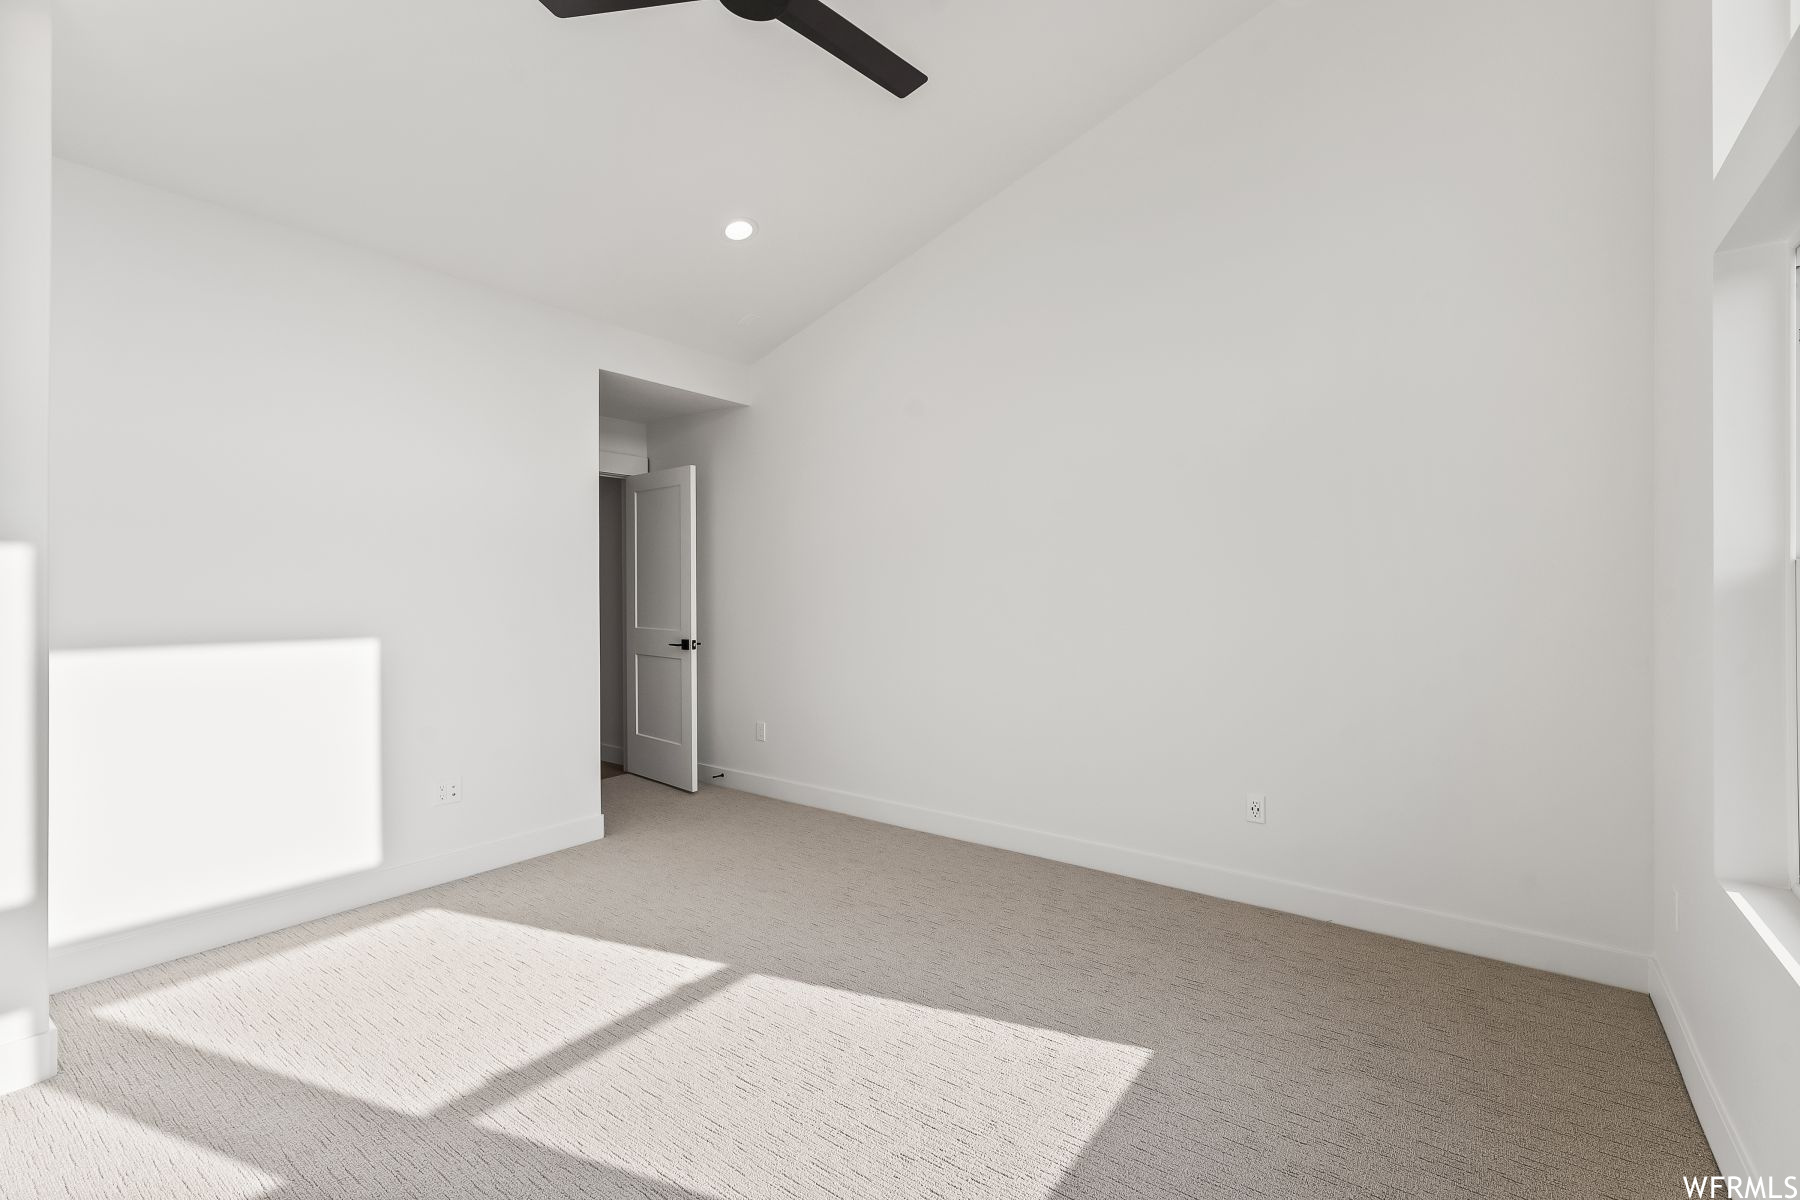 Mater bedroom featuring lofted ceiling, ceiling fan, and light colored carpet